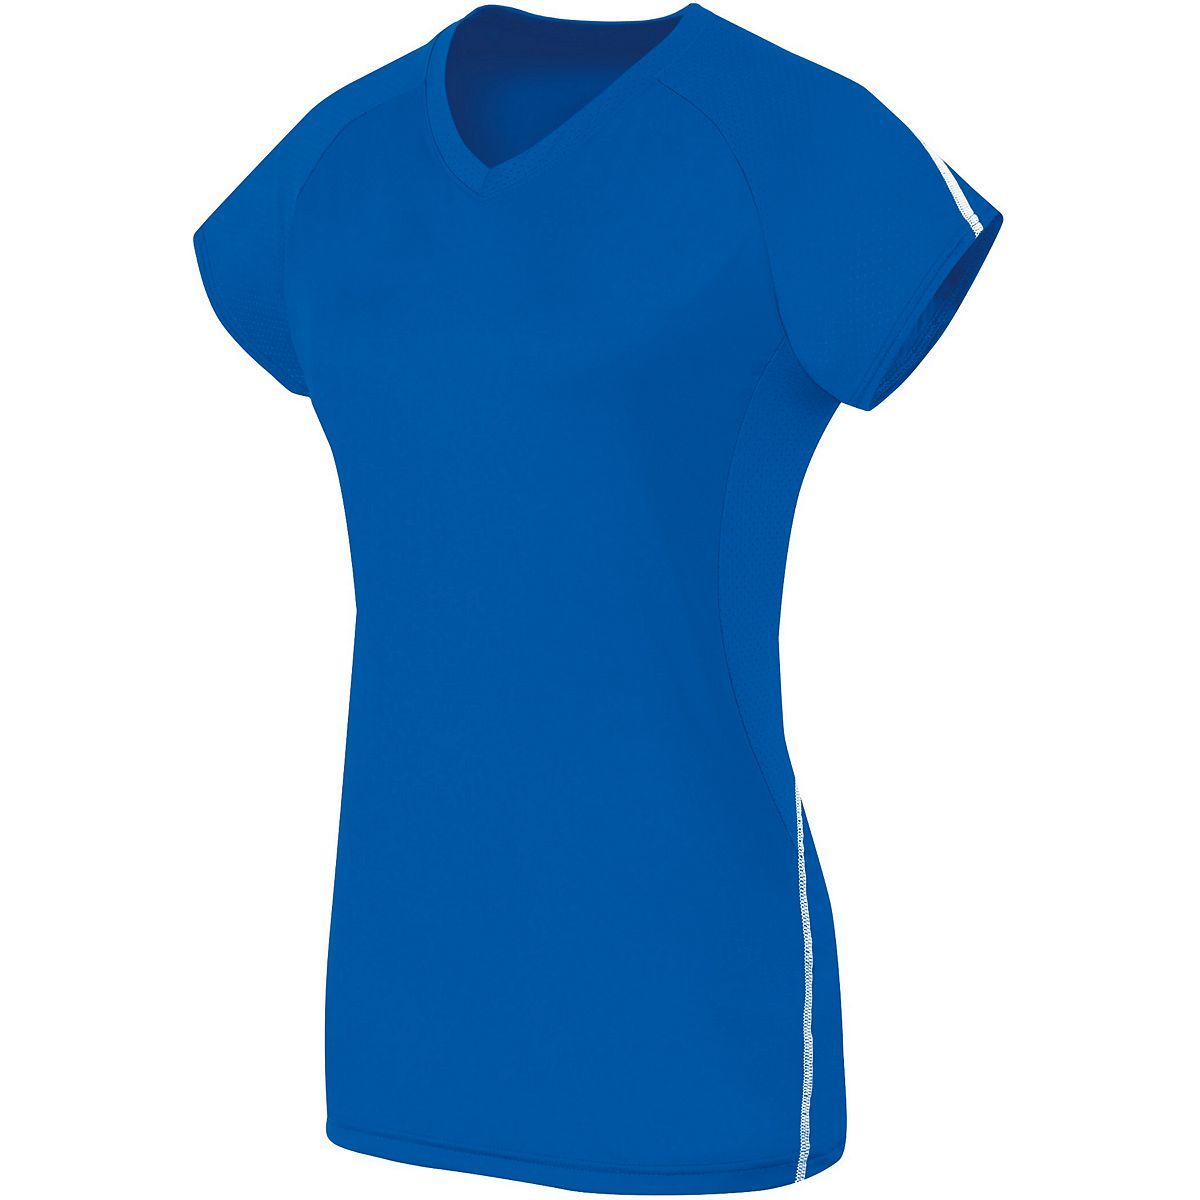 High 5 Ladies Short Sleeve Solid Jersey in Royal/White  -Part of the Ladies, Ladies-Jersey, High5-Products, Volleyball, Shirts product lines at KanaleyCreations.com